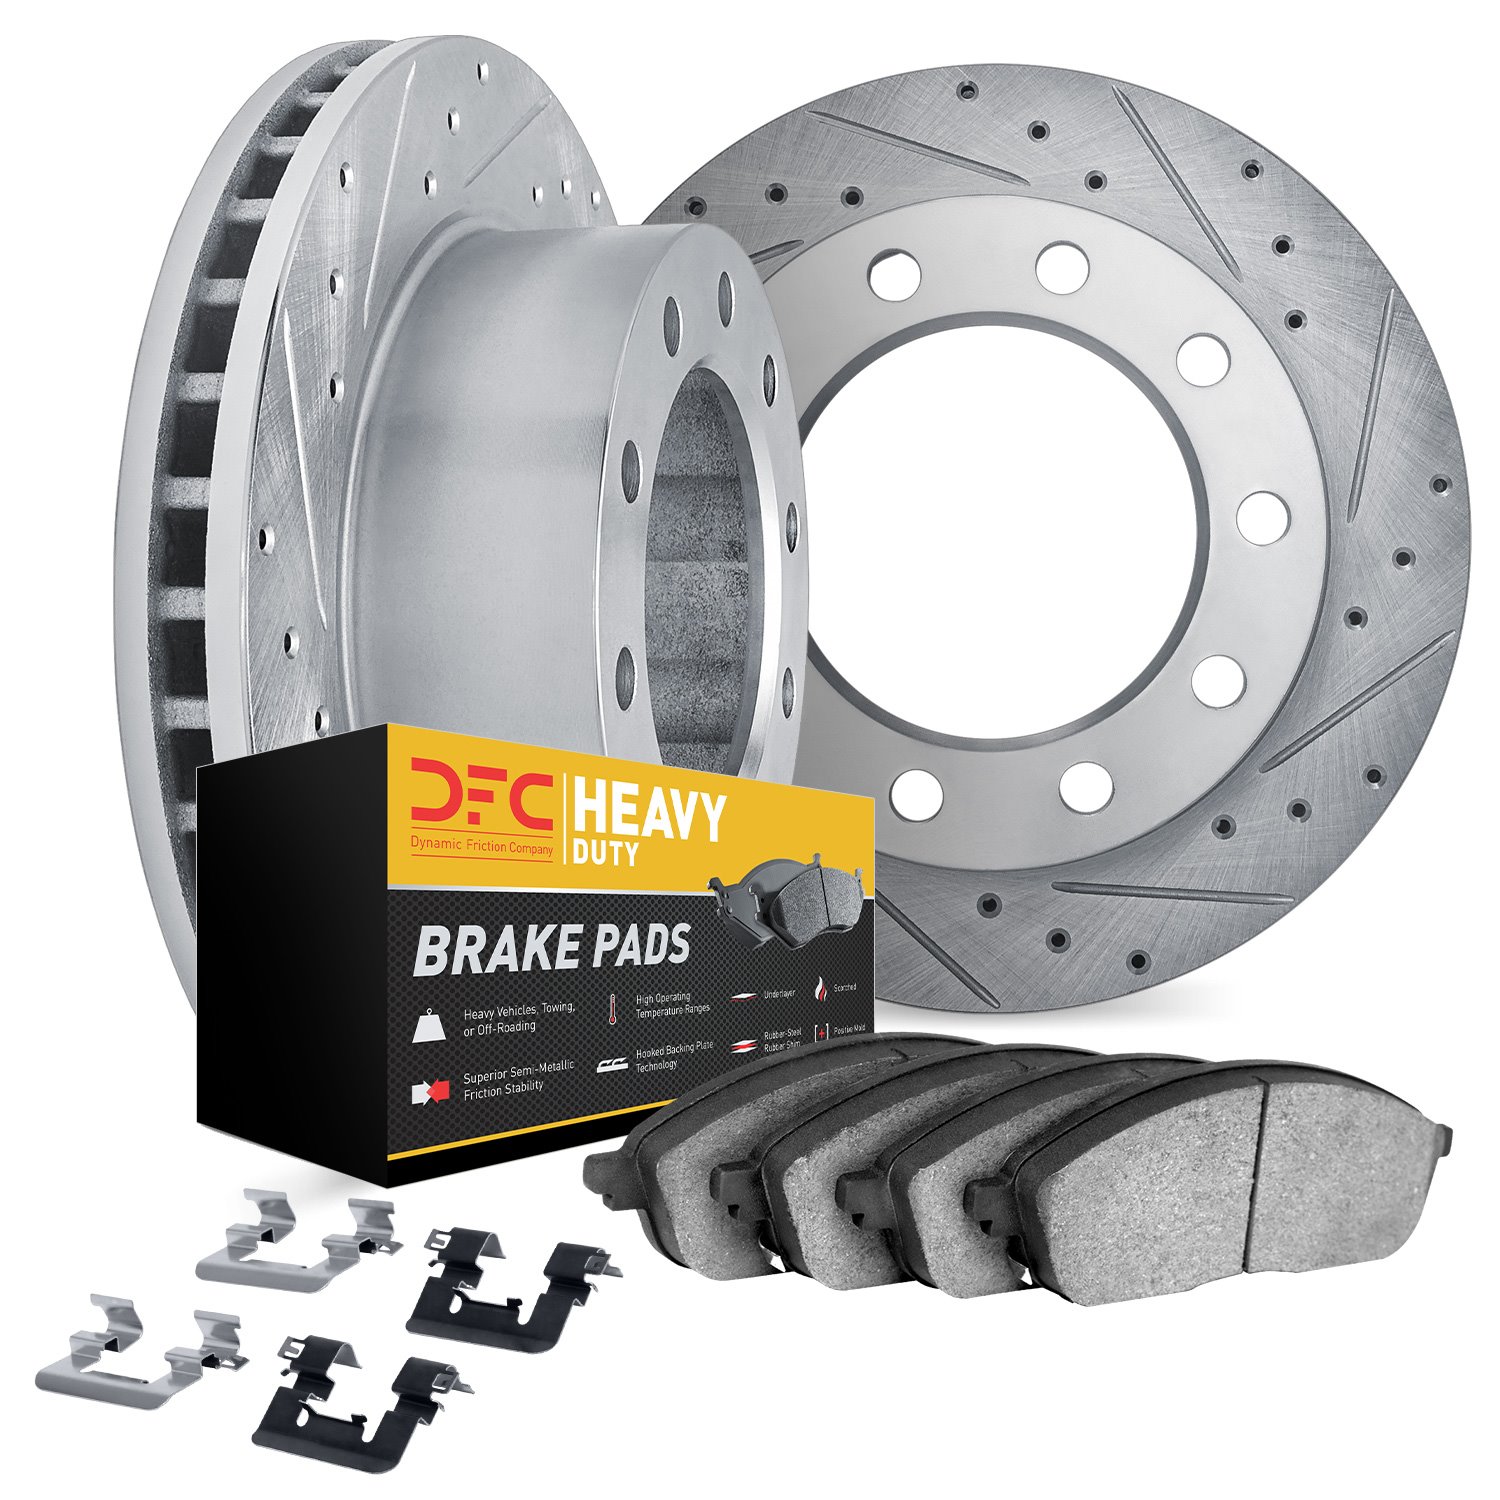 7212-99177 Drilled/Slotted Rotors w/Heavy-Duty Brake Pads Kit & Hardware [Silver], 1999-2009 Ford/Lincoln/Mercury/Mazda, Positio